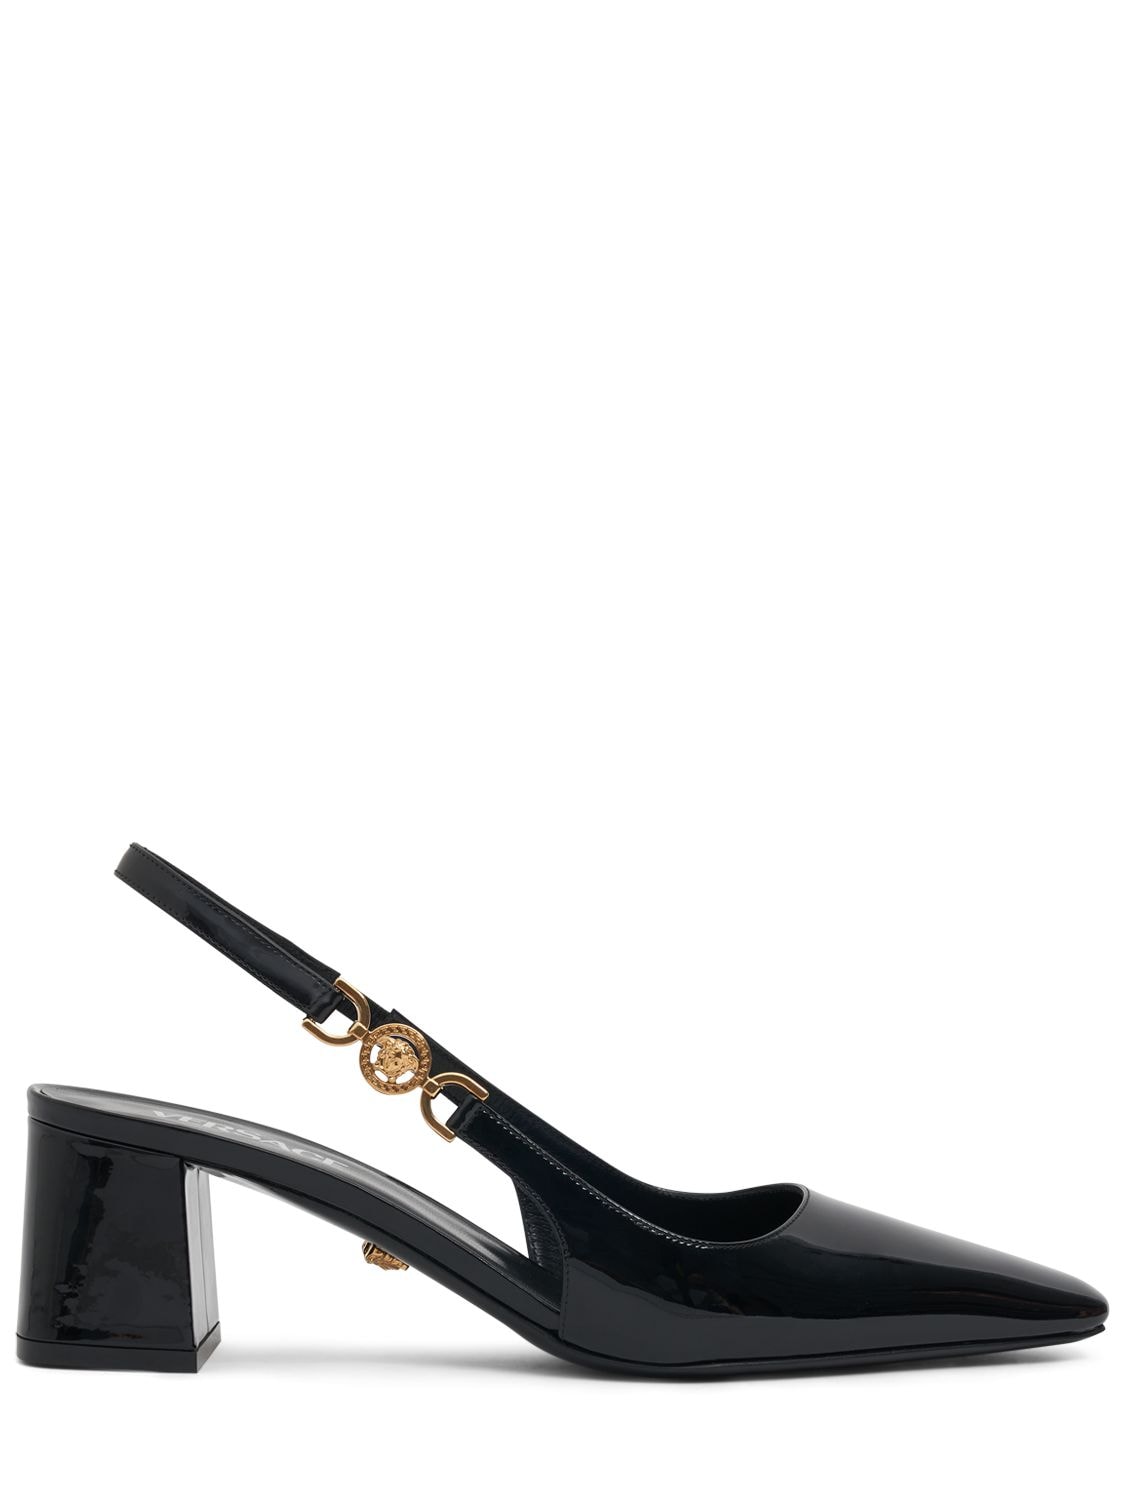 Versace 55mm Patent Leather Slingback Pumps In Black